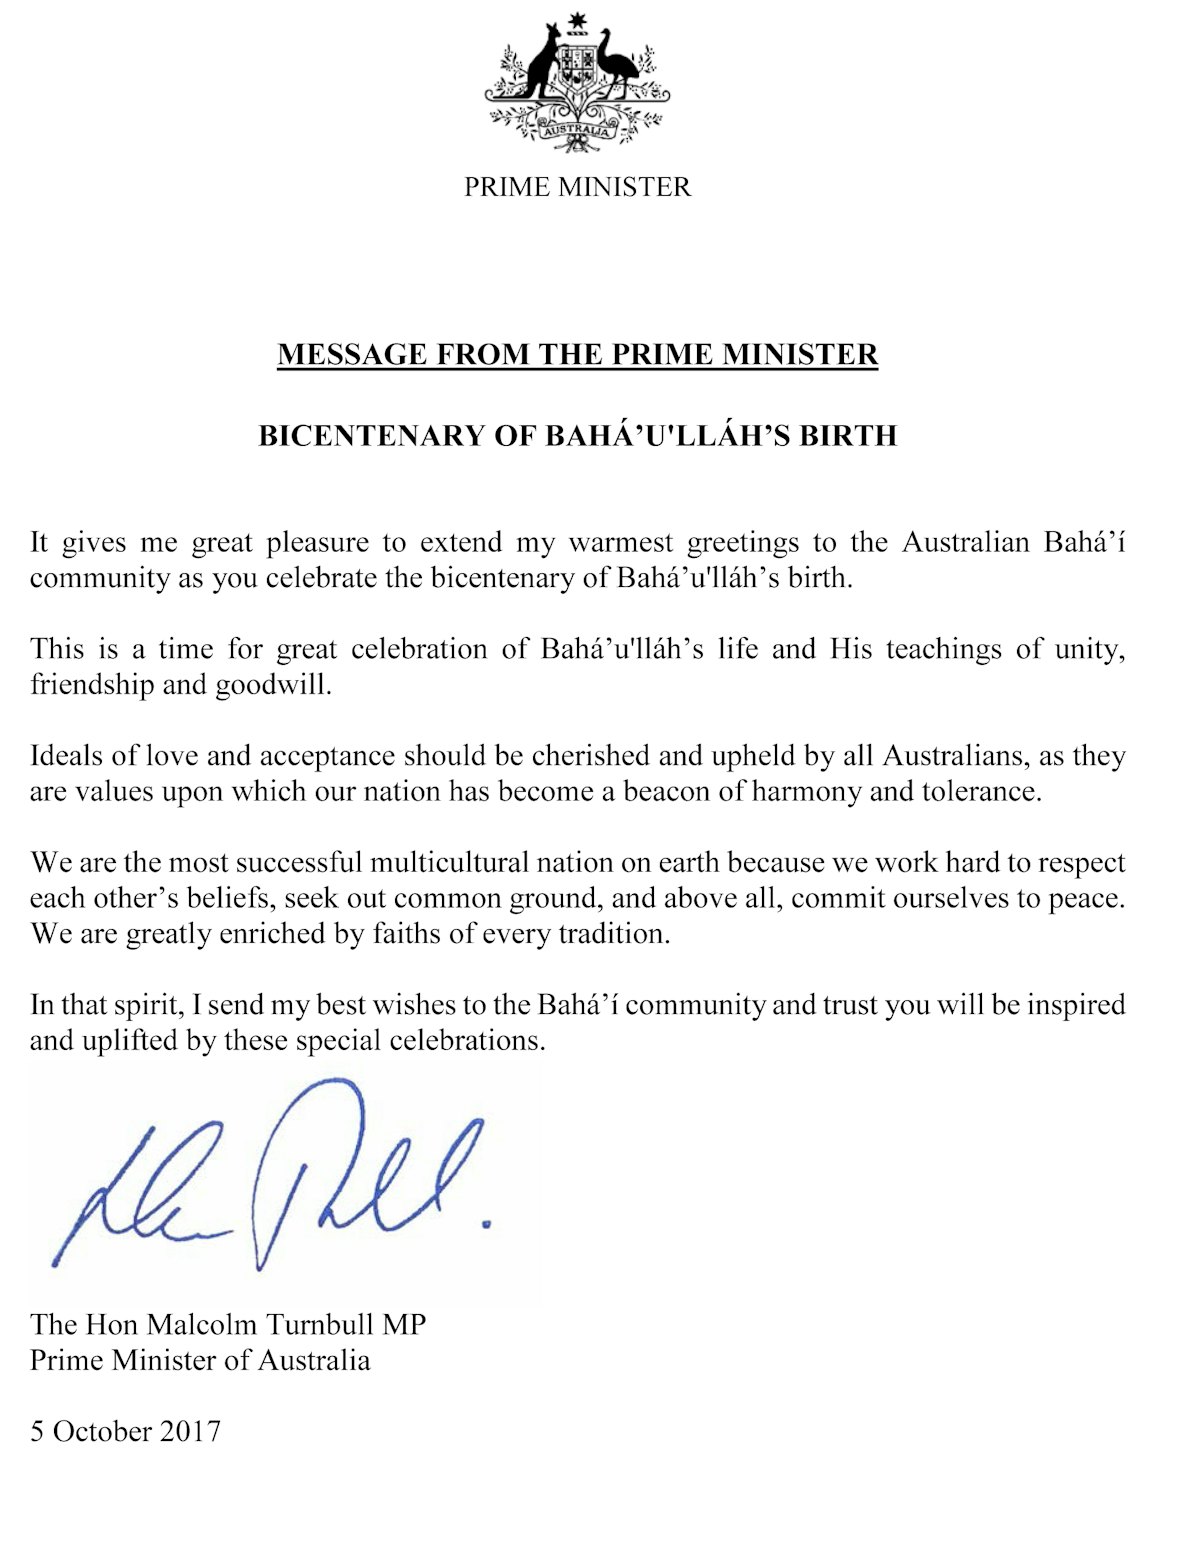 “This is a time for great celebration of Baha’u’llah’s life and His teachings of unity, friendship, and goodwill,” wrote Australian Prime Minister Turnbull to the Baha’i community.